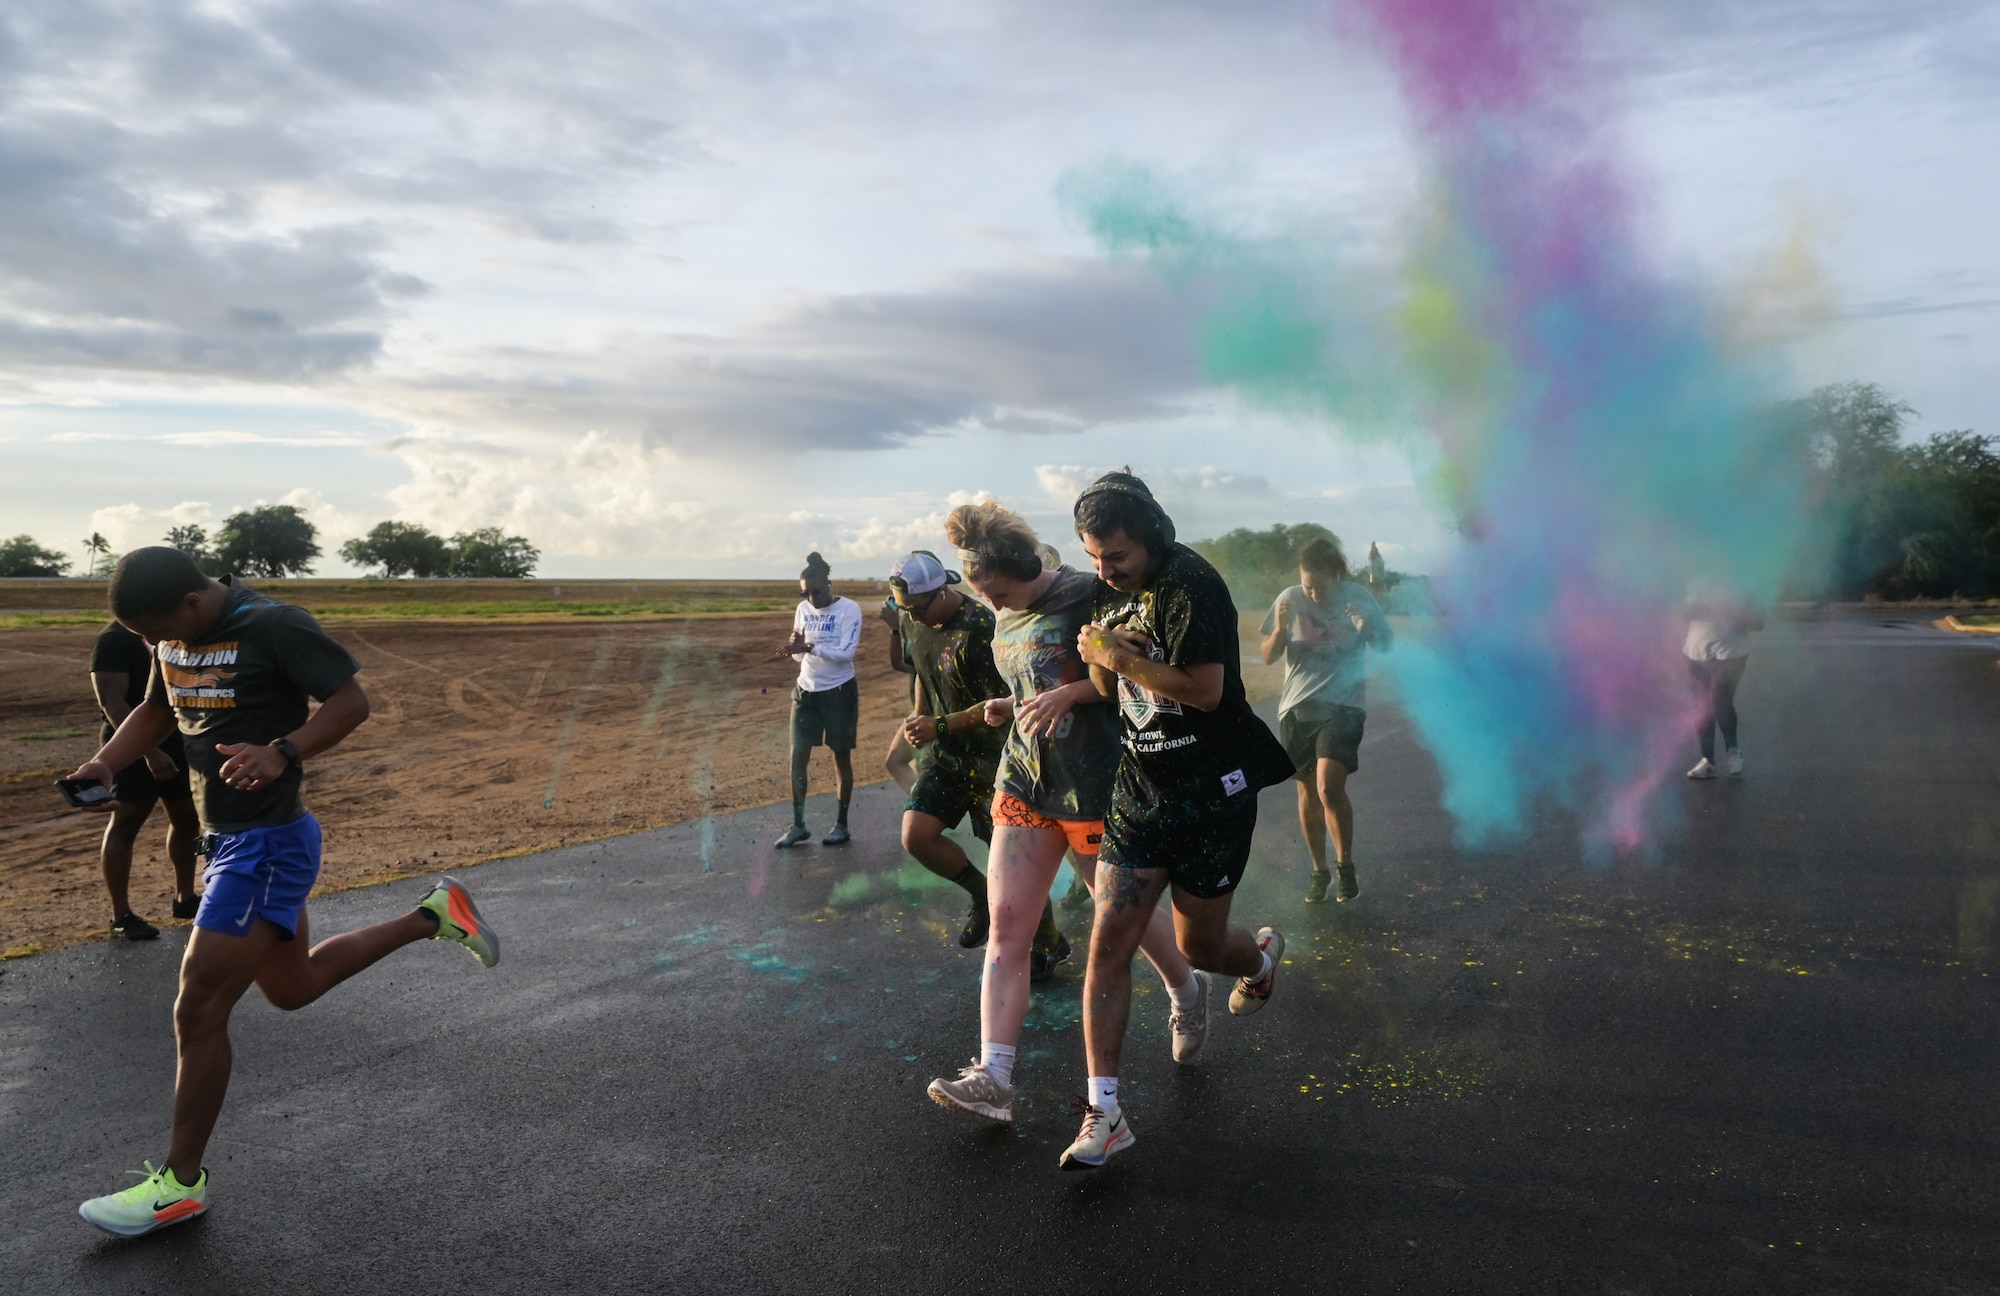 Runners begin the 5K Fun Run at Joint Base Pearl Harbor-Hickam, Hawaii, Sept. 23, 2022. The run was held in support of Suicide Prevention Month. (U.S. Air Force photo by Staff Sgt. Alan Ricker)